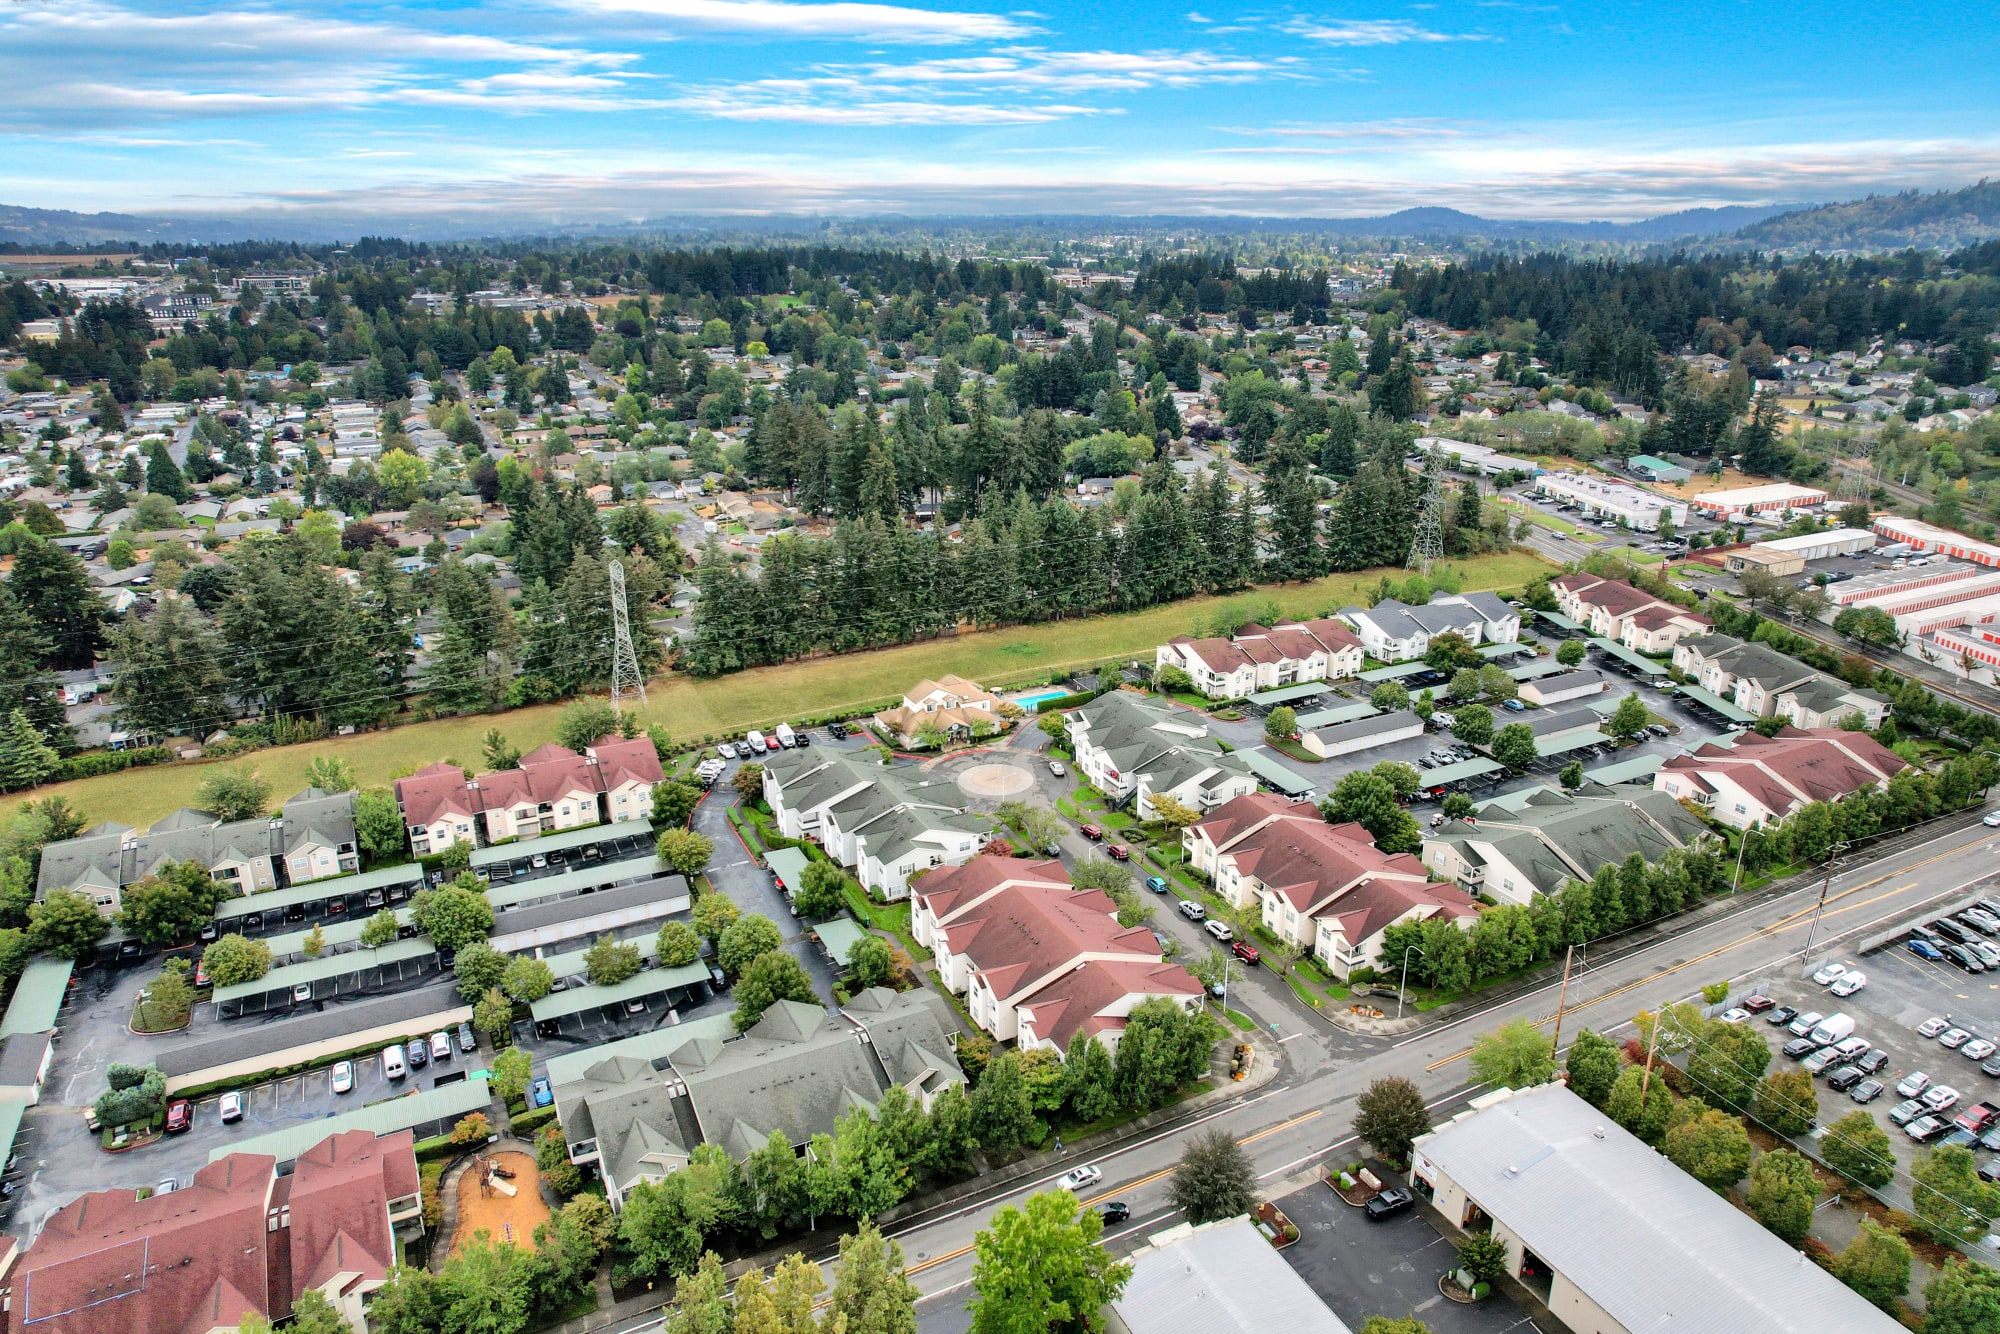 Aerial Property Photo at The Landings at Morrison Apartments in Gresham, Oregon